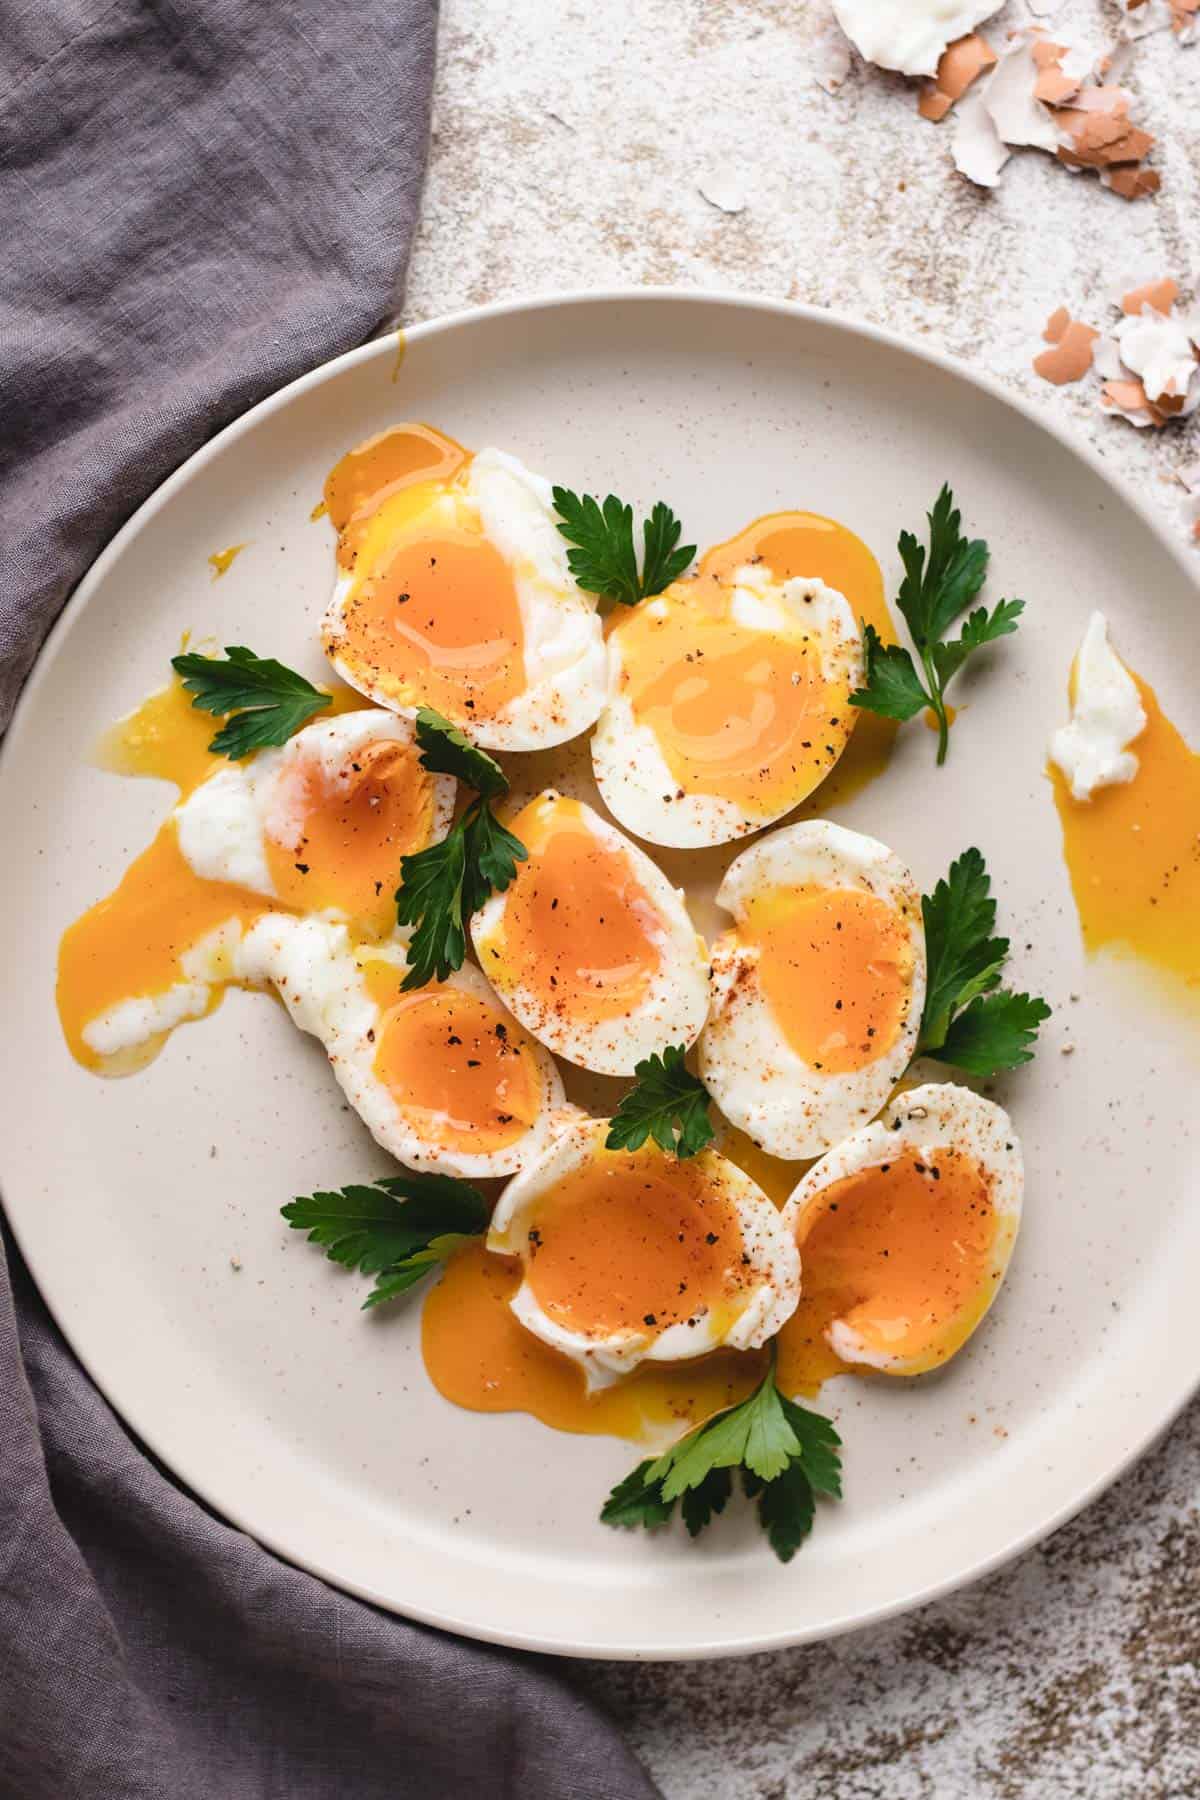 Soft-boiled eggs cut in half on a large plate.